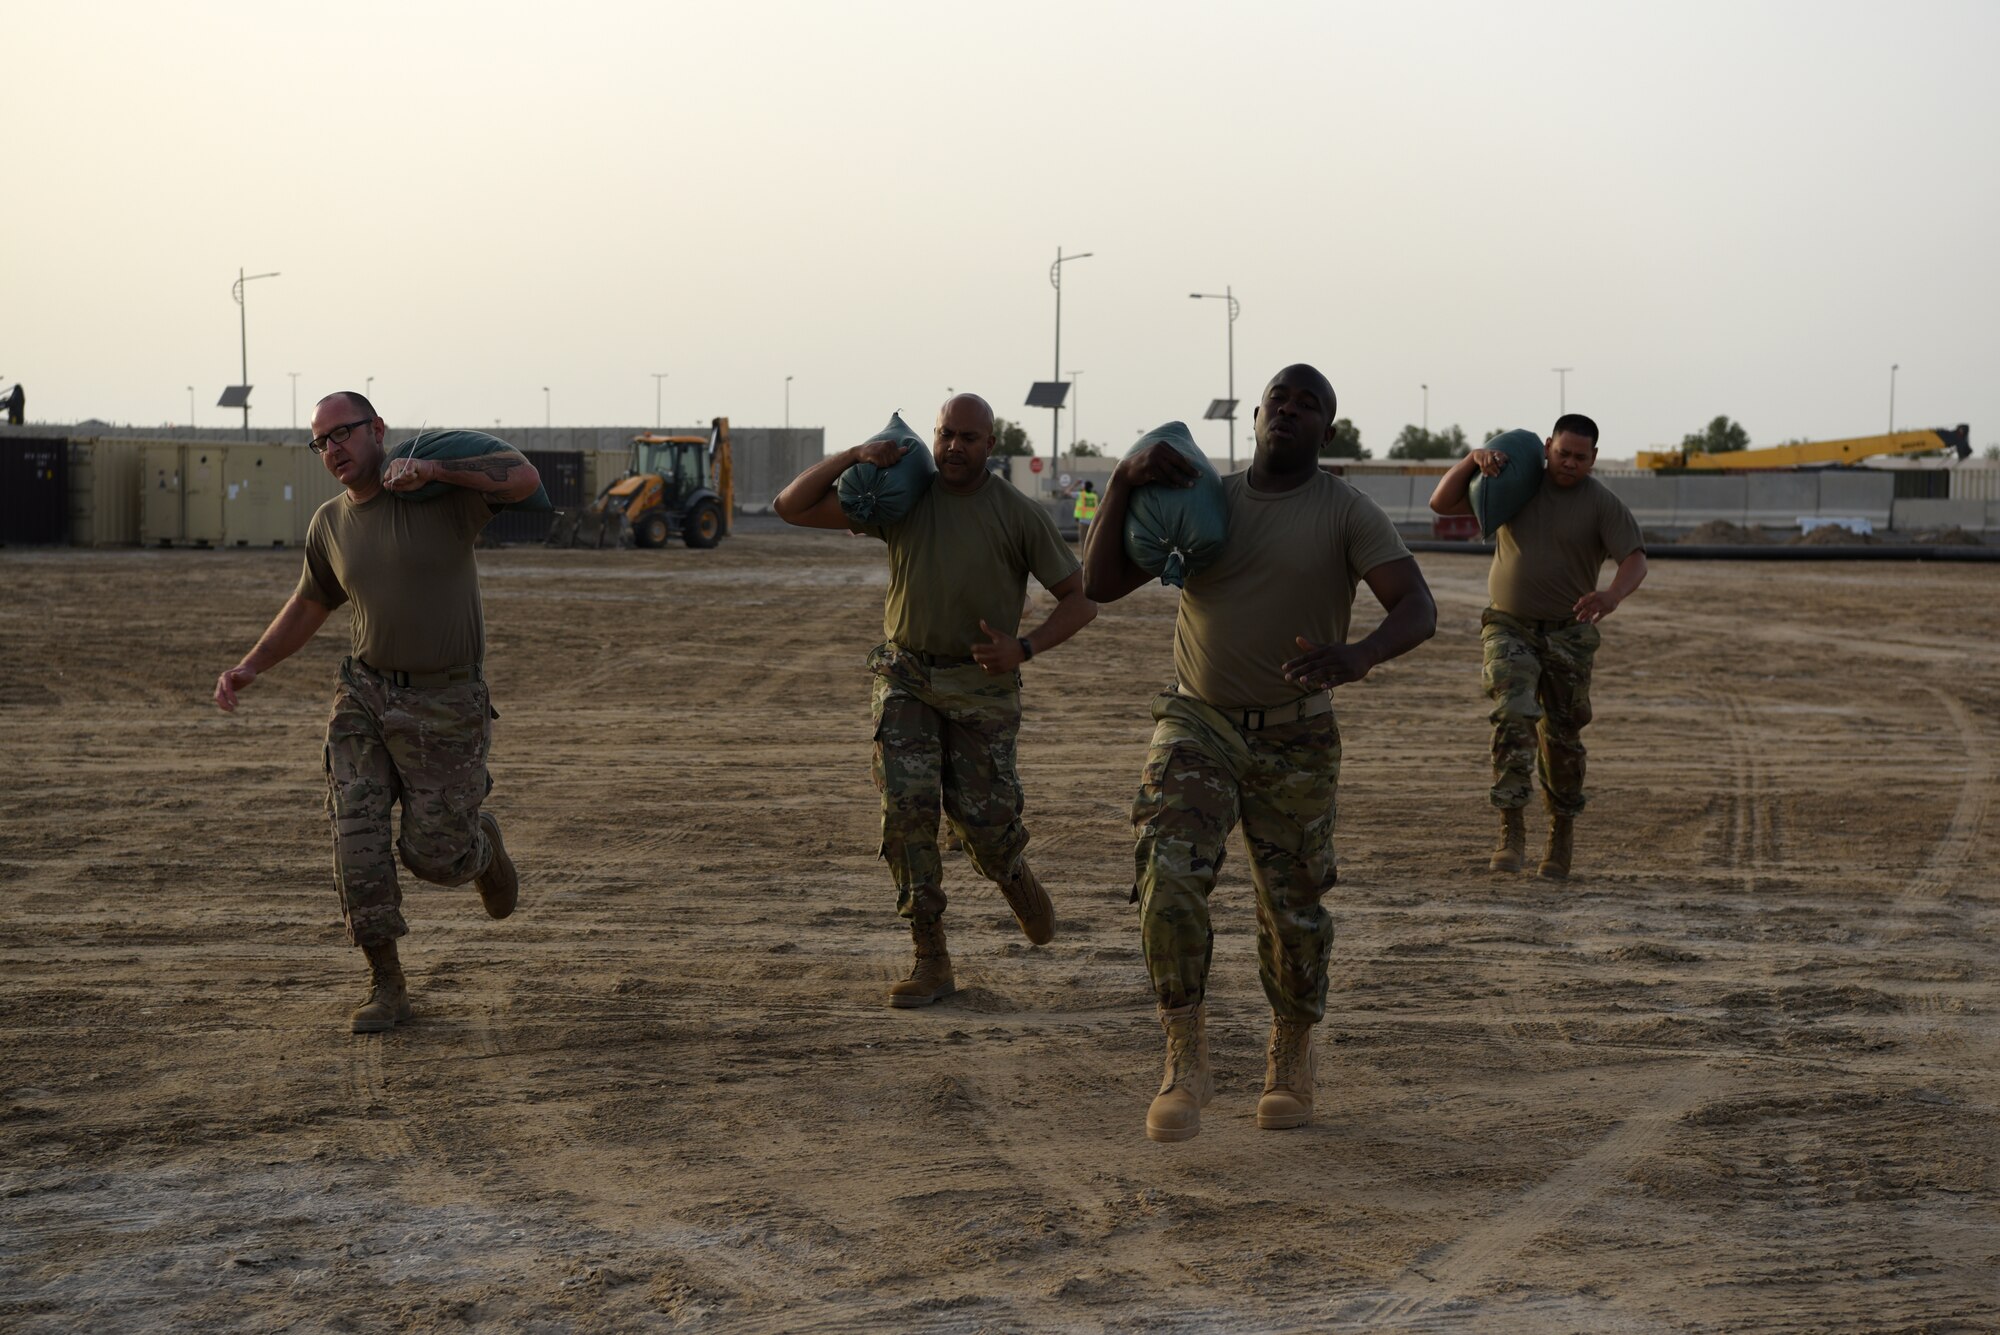 A force protection escort fire team runs with sandbags as part of the Police Week 2019 fire team challenge May 12, 2019, at Al Dhafra Air Base, United Arab Emirates.